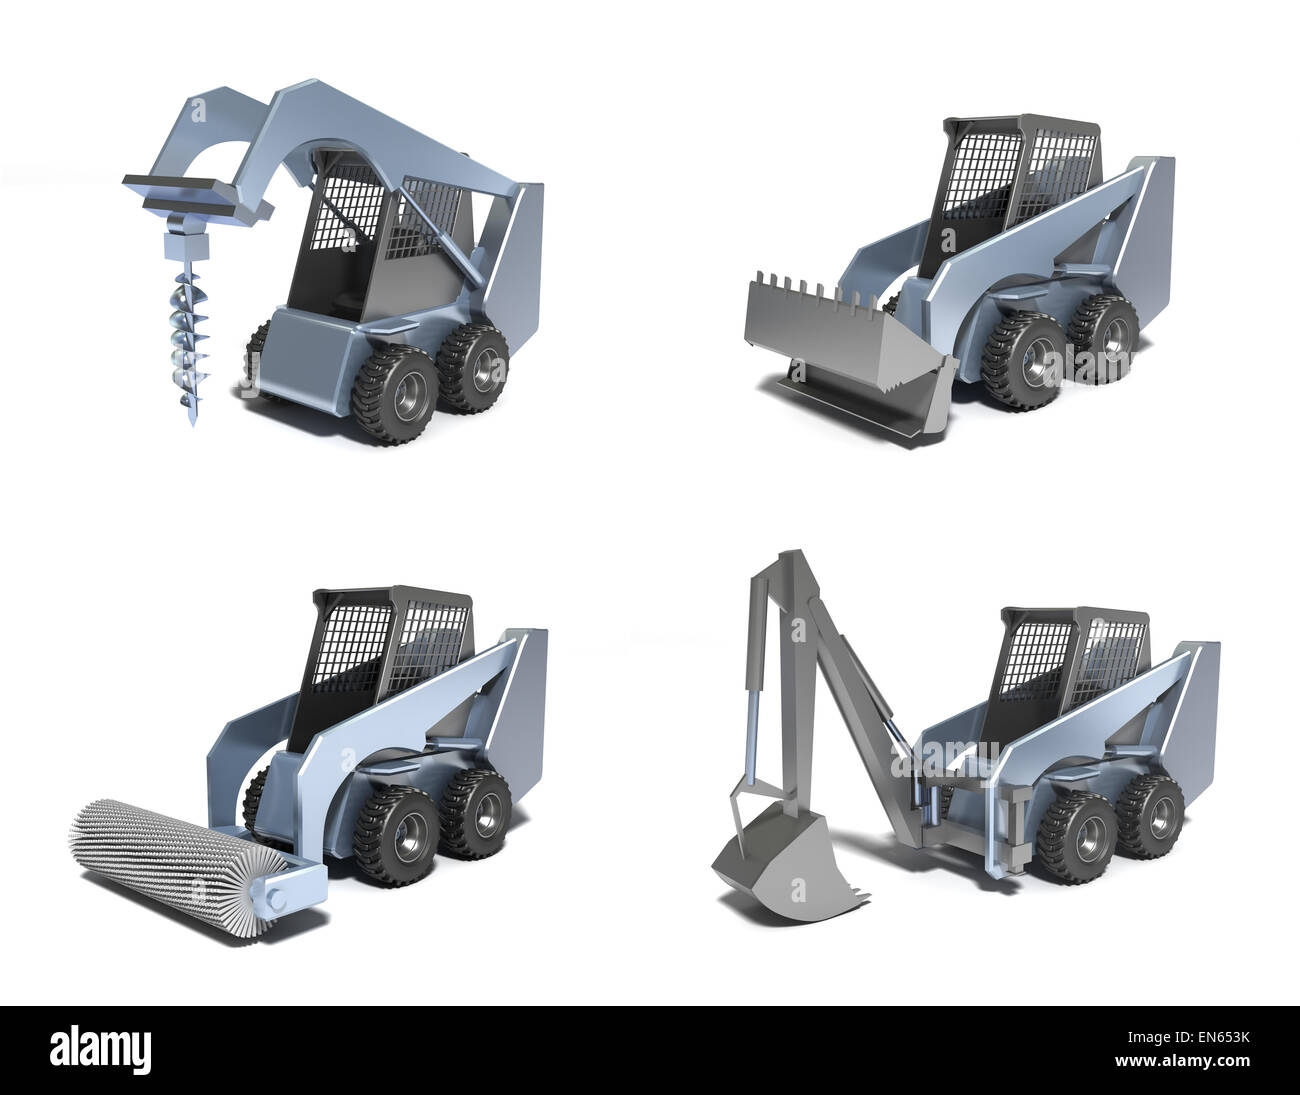 Small tractors. 3D image. Stock Photo